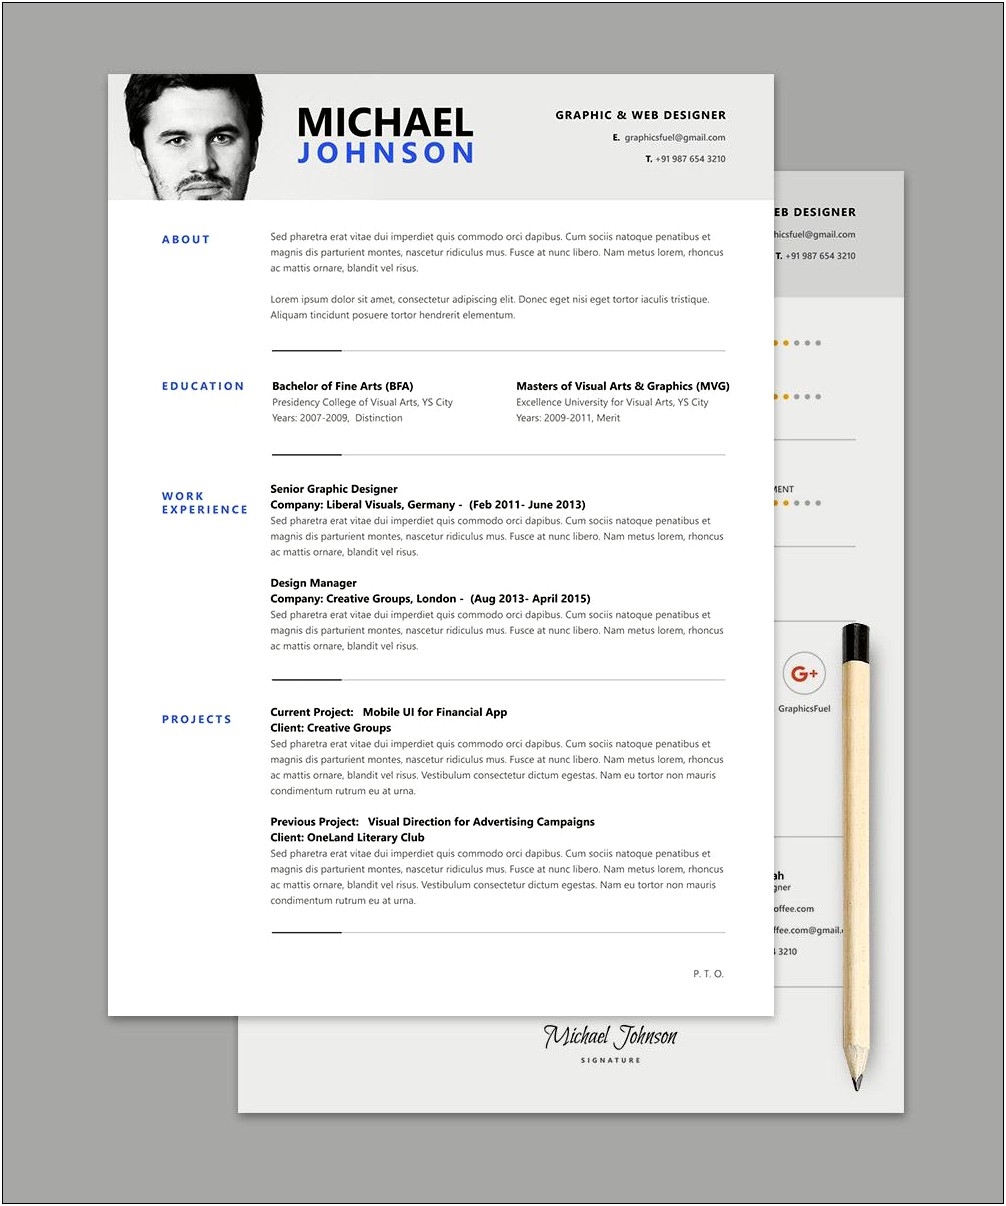 Resume Examples For 50+ Year Olds